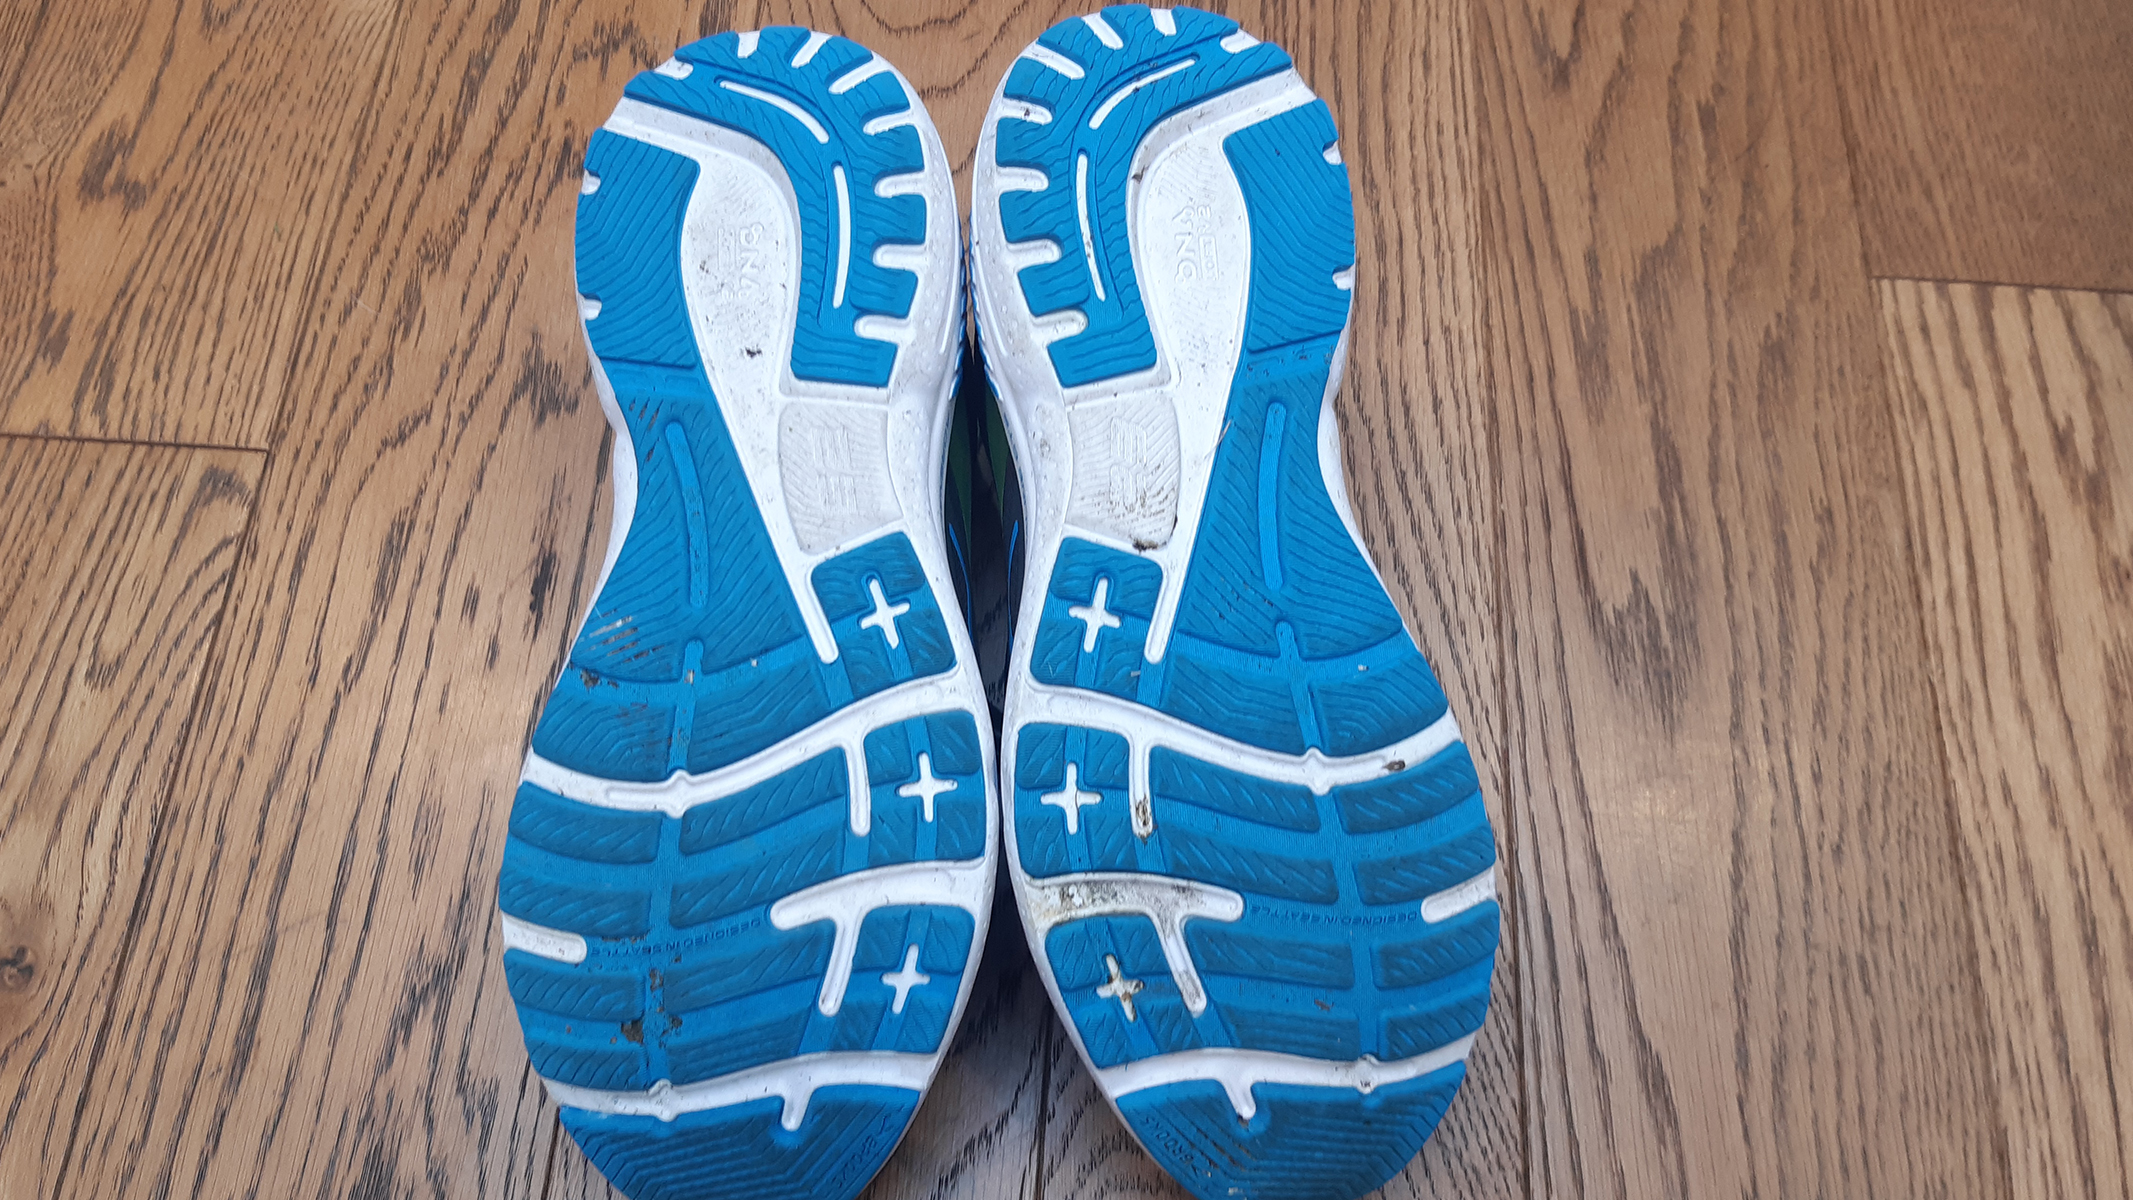 The blue and white outsoles of the Brooks Adrenaline GTS 23